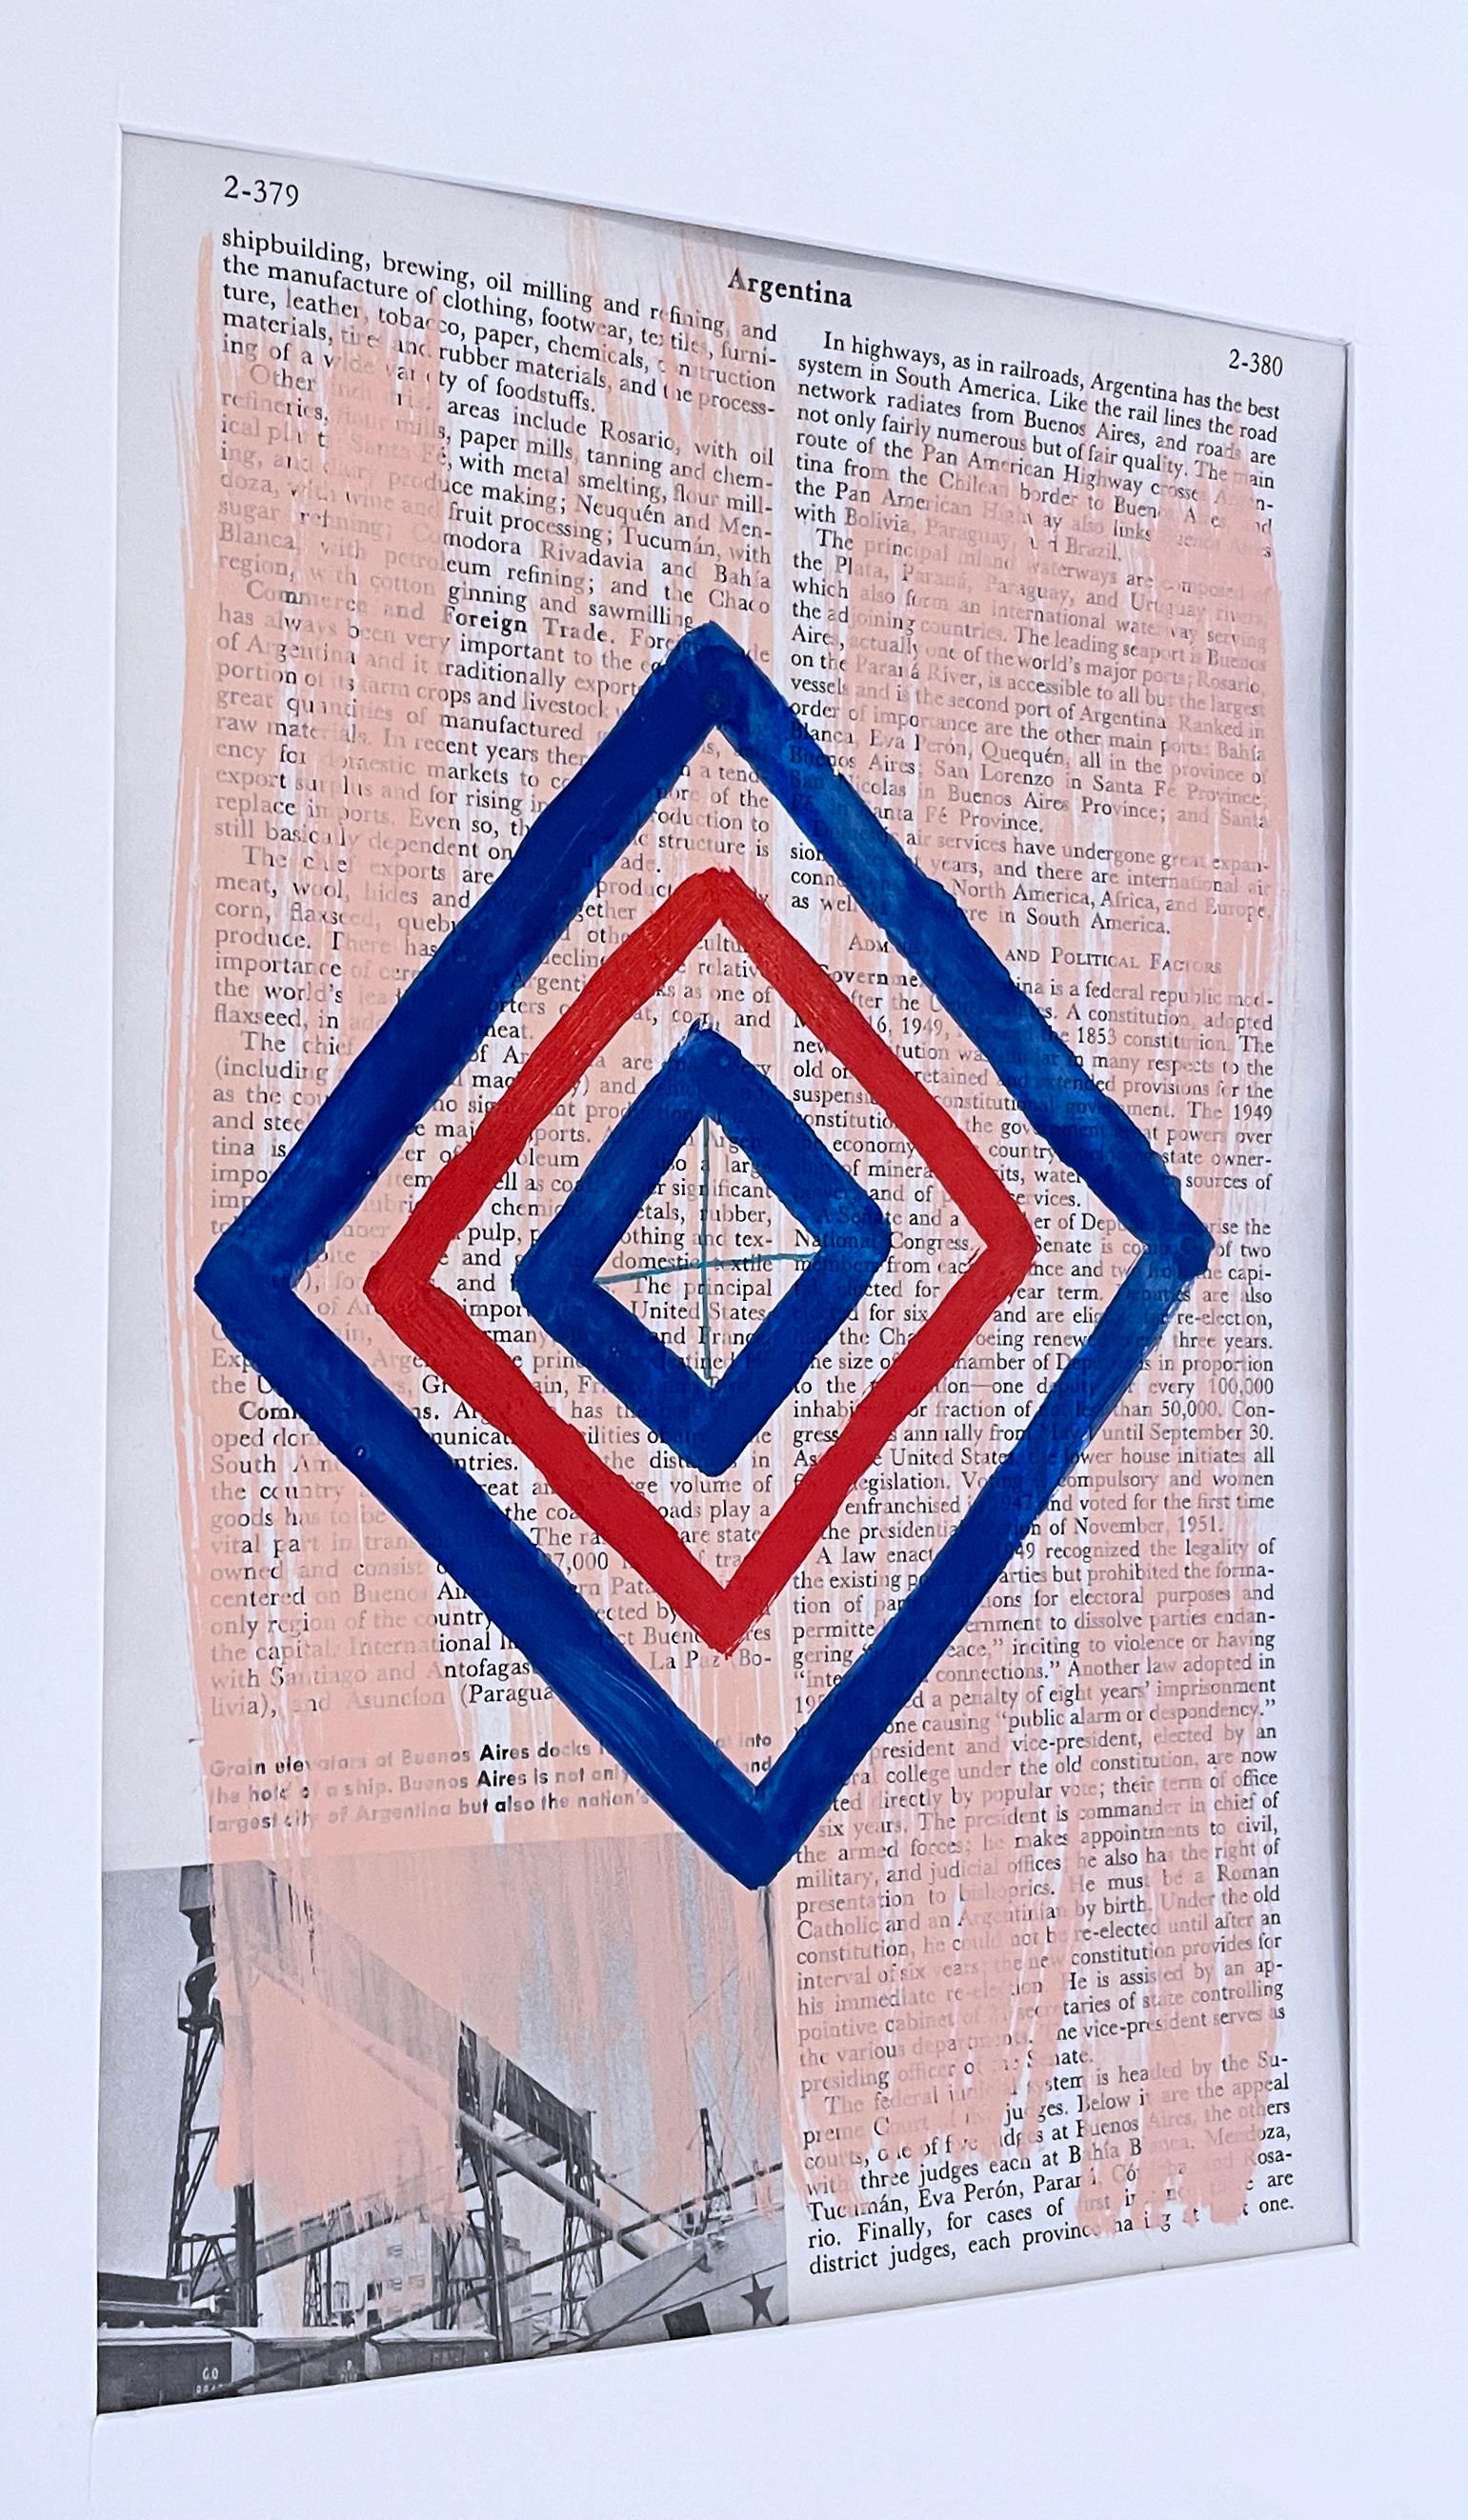 Untitled (blue & red diamonds)

Gouache on 1957 Encyclopedia page

Feminist Art and Contemporary Feminist / Geometric Abstraction / Gestural Abstraction / Abstract Art / Minimalism and Contemporary Minimalist

Frame size 12.875 x 9.875 x 0.675